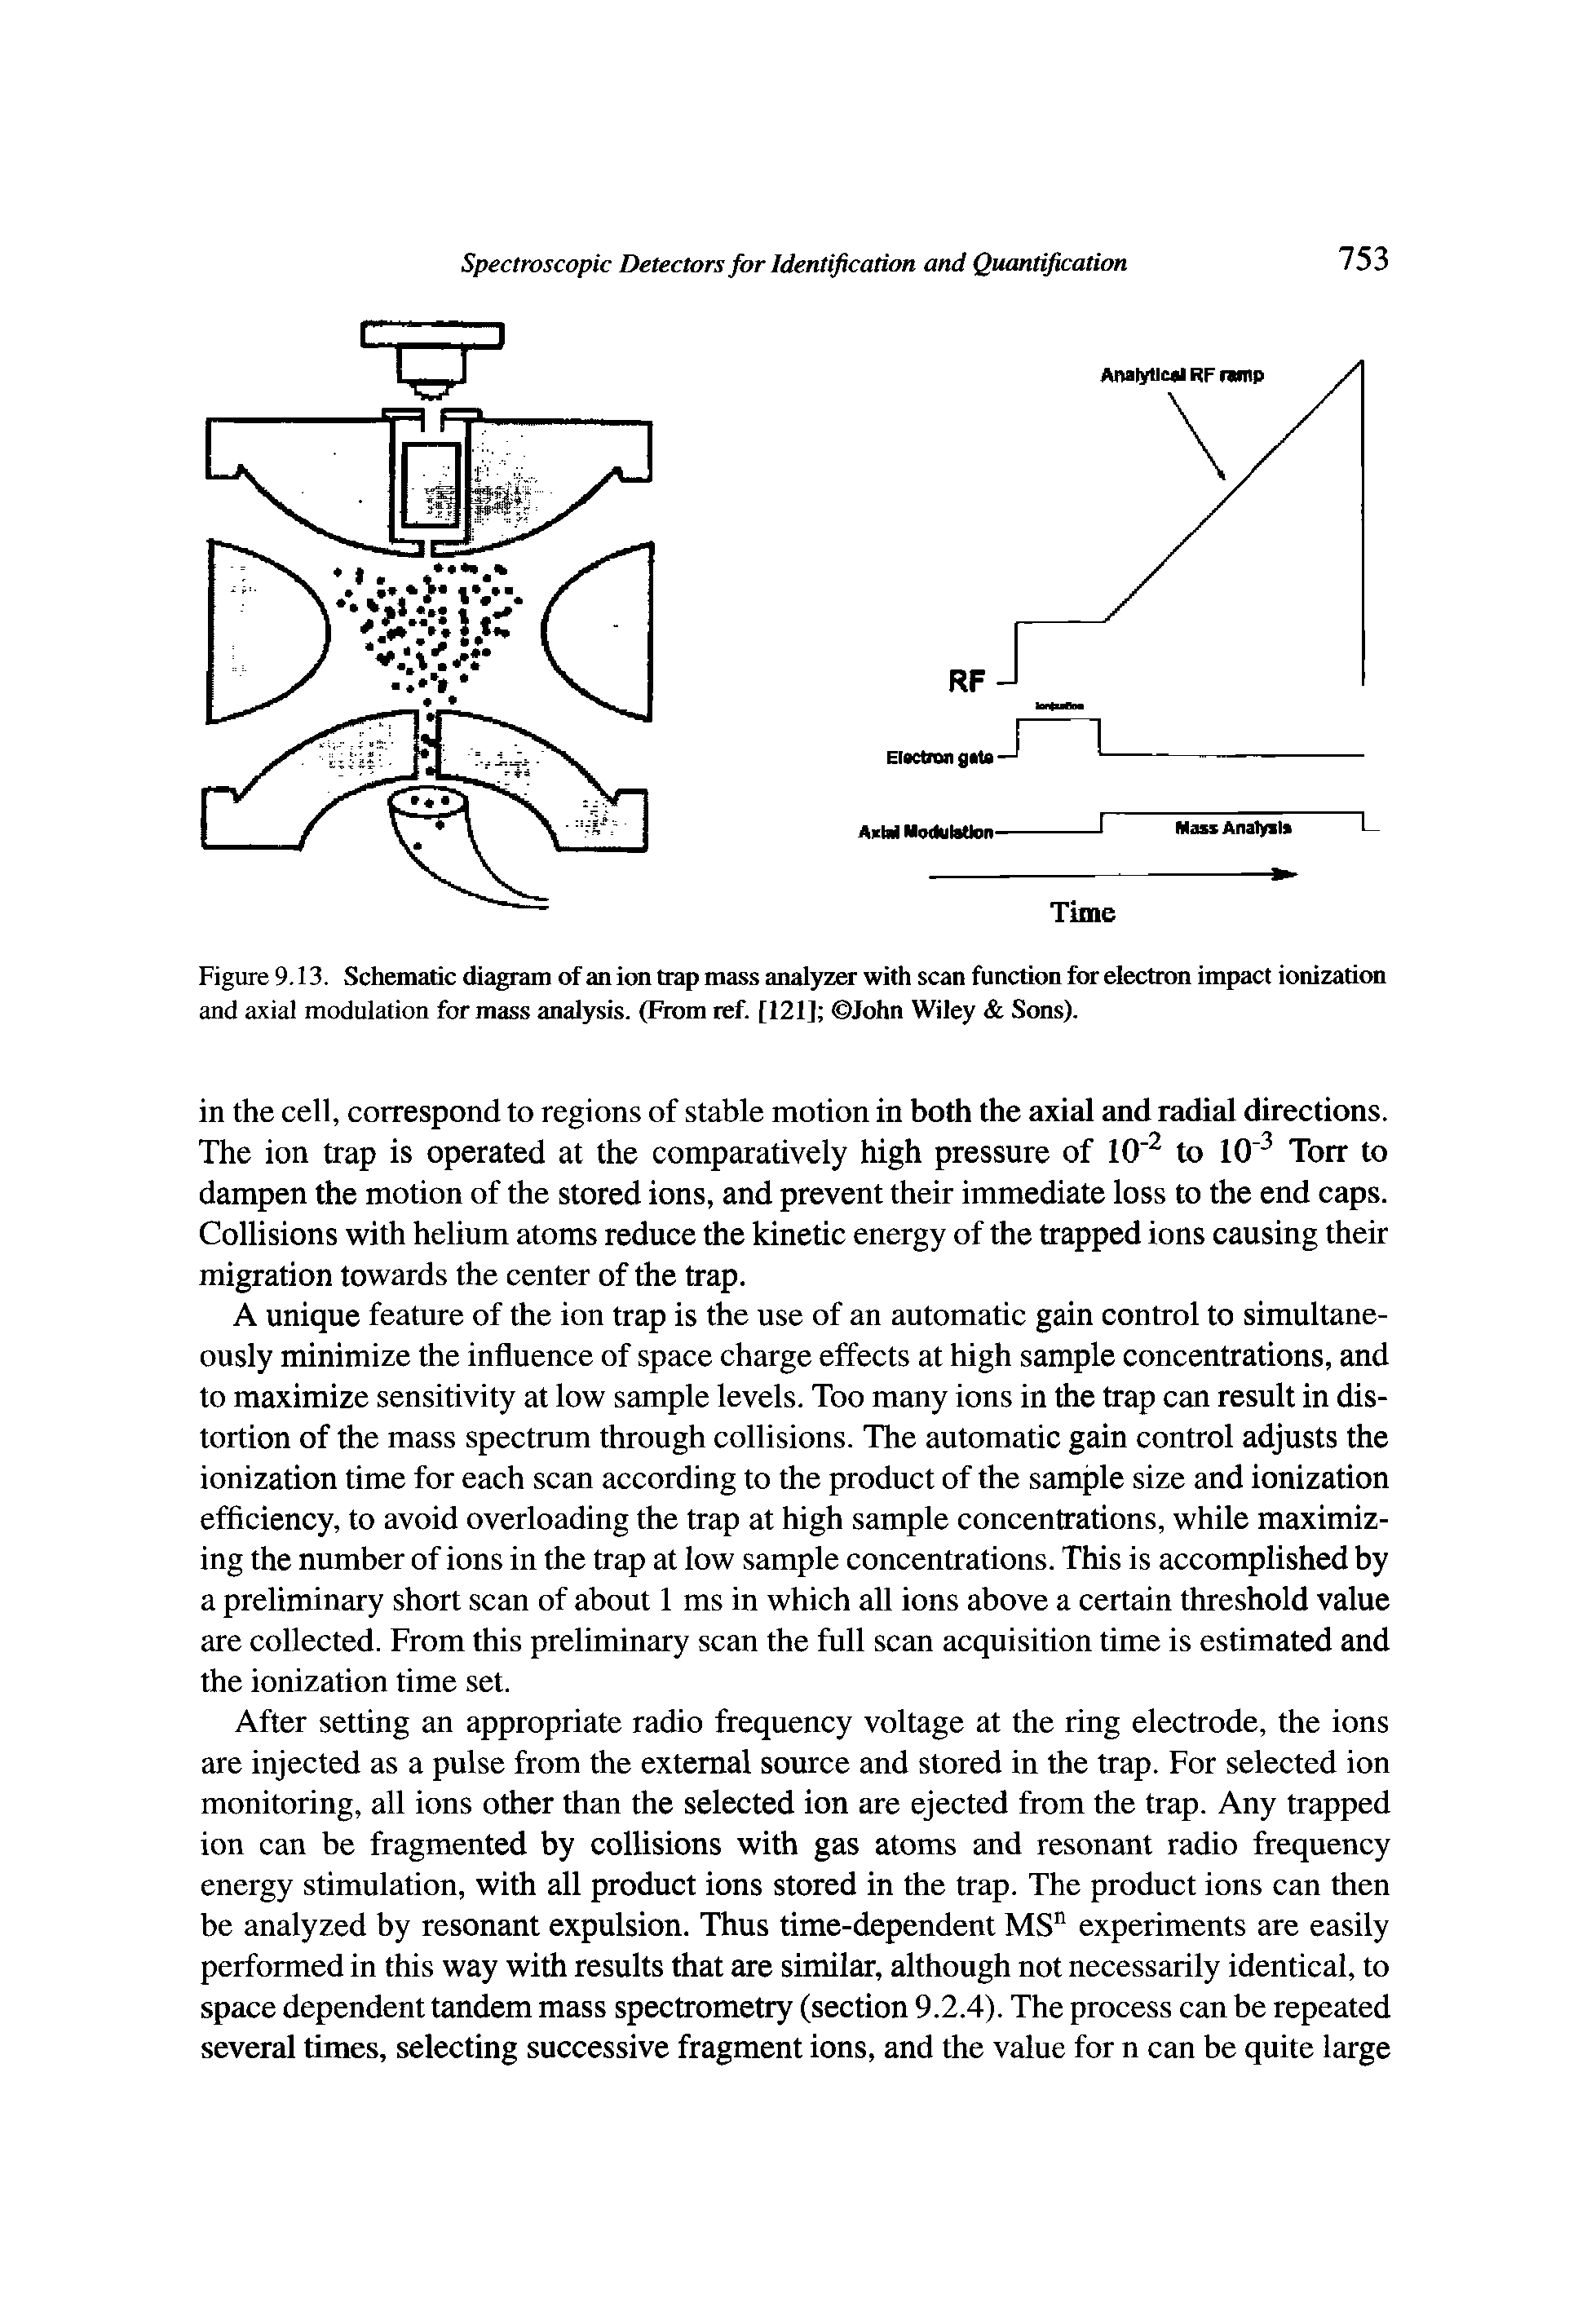 Figure 9,13. Schematic diagram of an ion trap mass analyzer with scan function for electron impact ionization and axial modulation for mass analysis. (From ref. [121] John Wiley Sons).